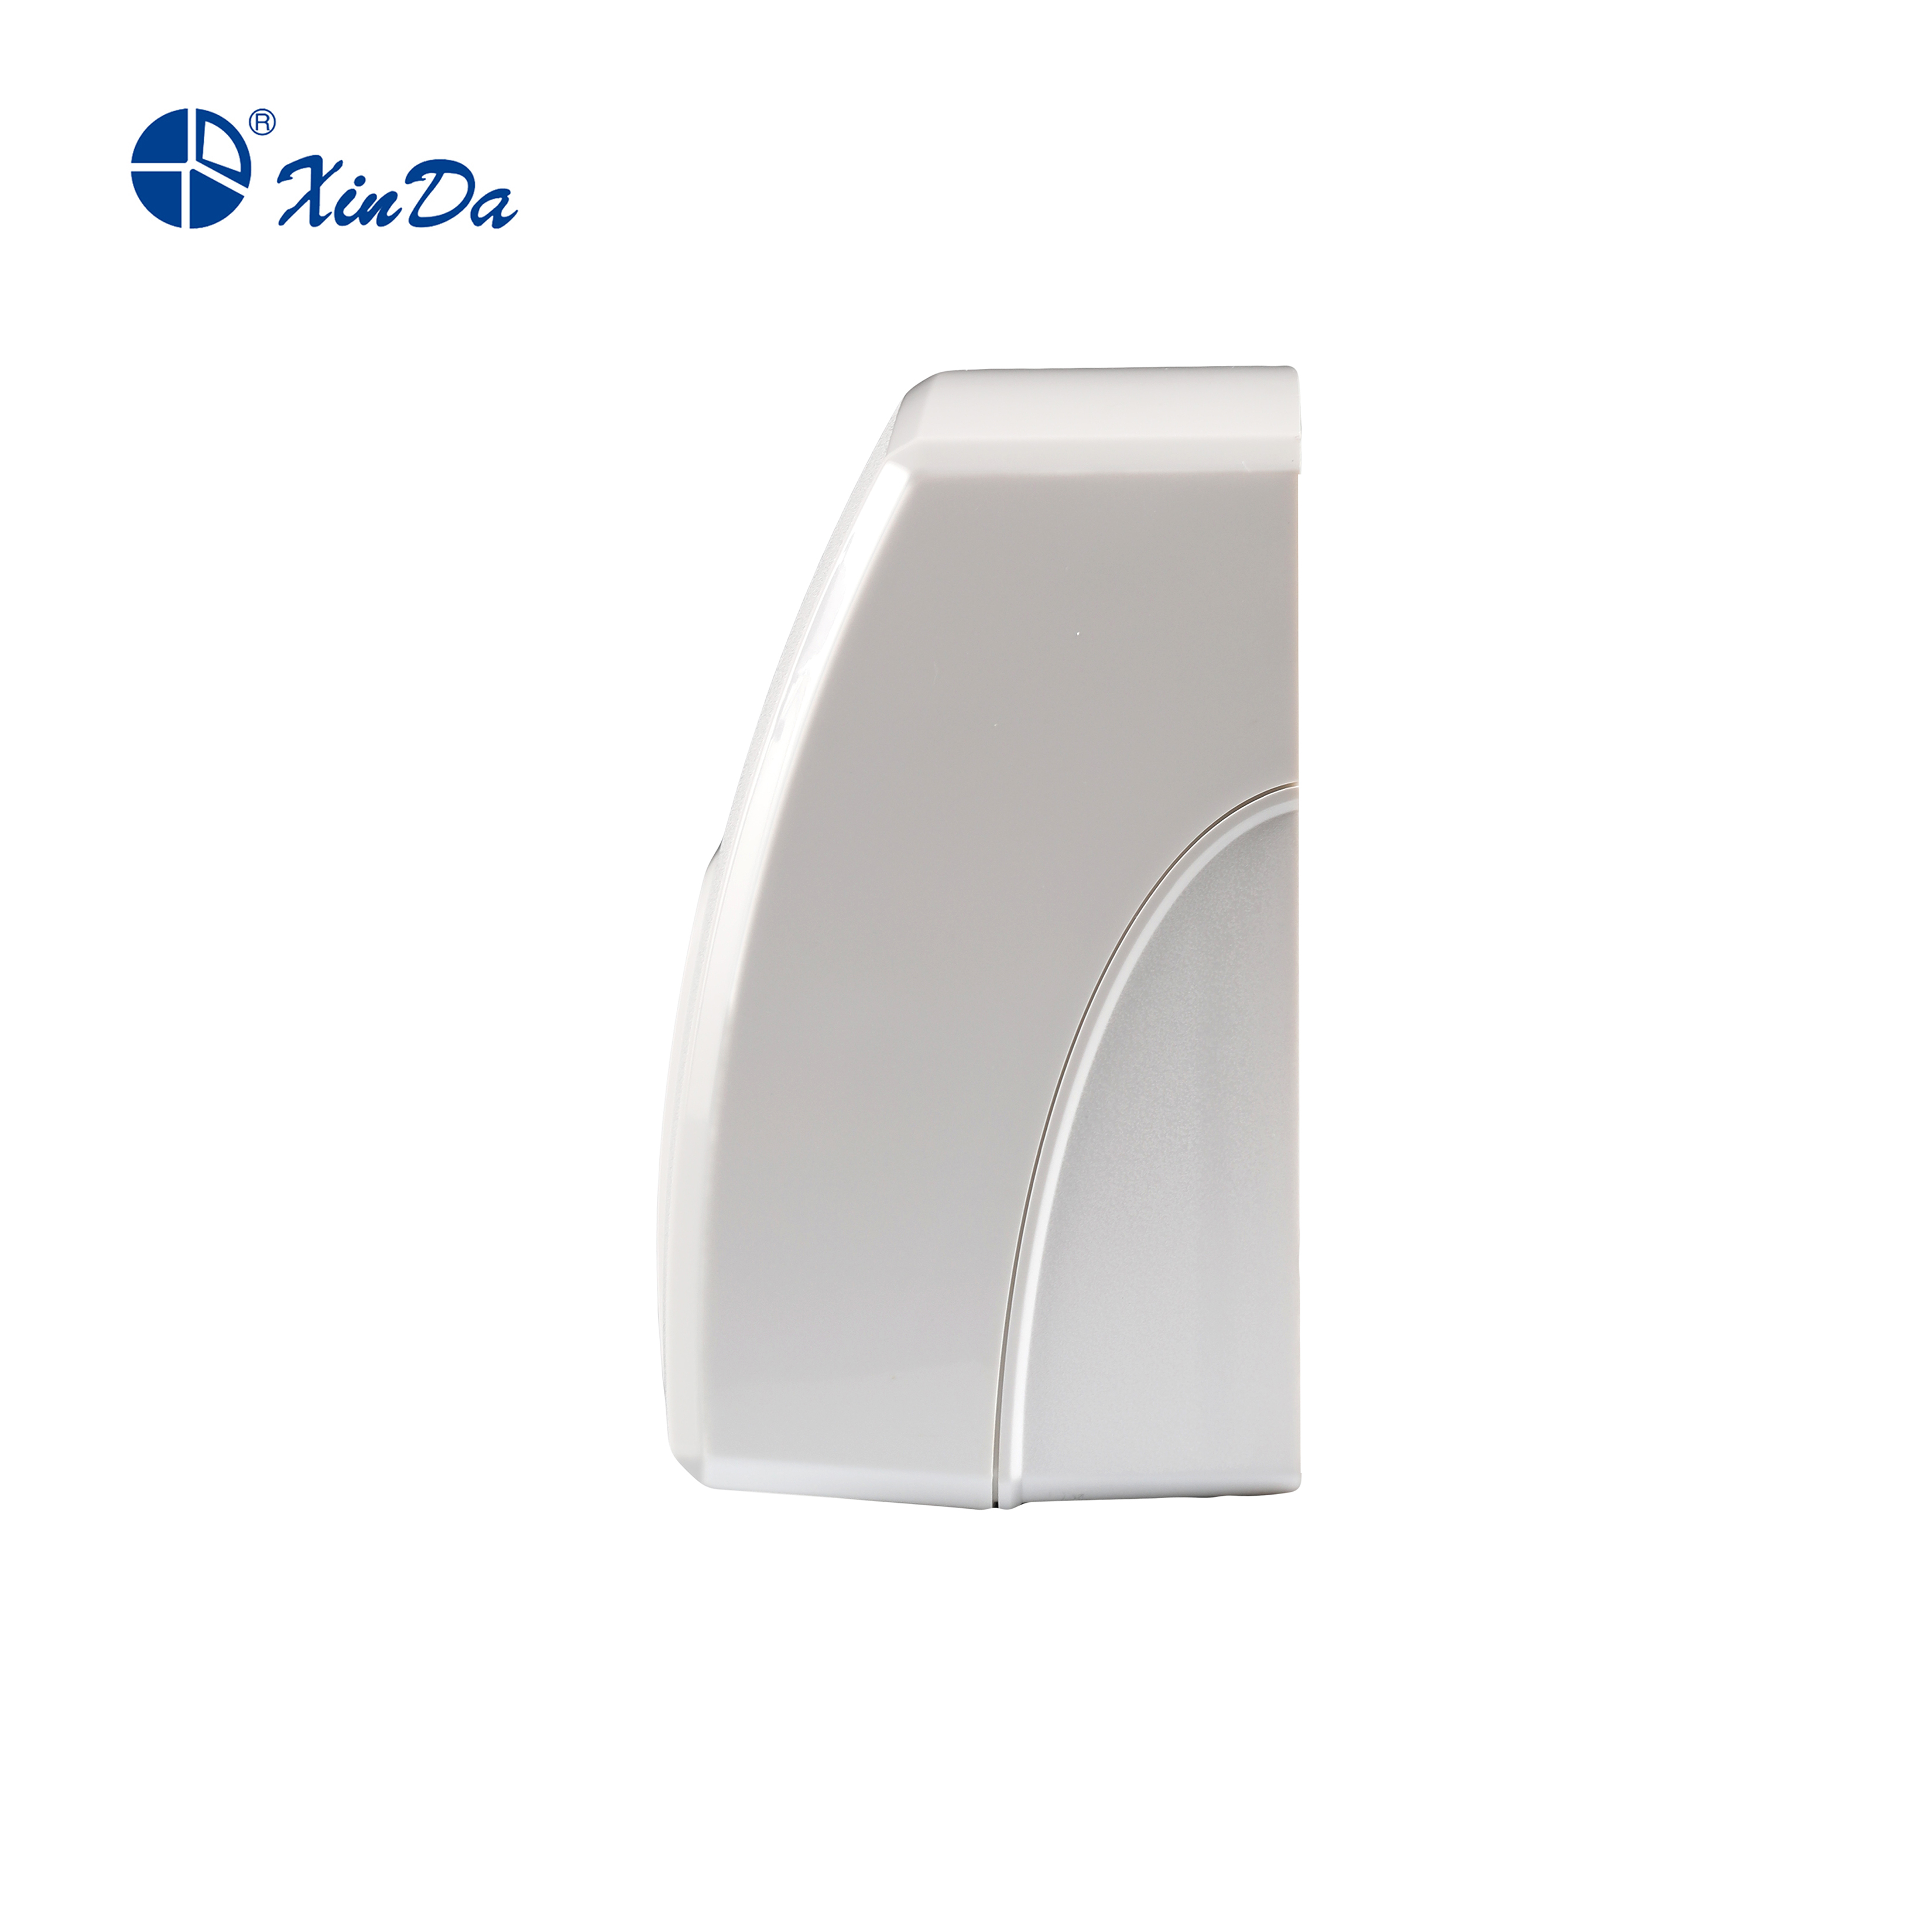 Auto Touchless Automatic Sensor Jet Air Blade Hand Dryer for Toilet